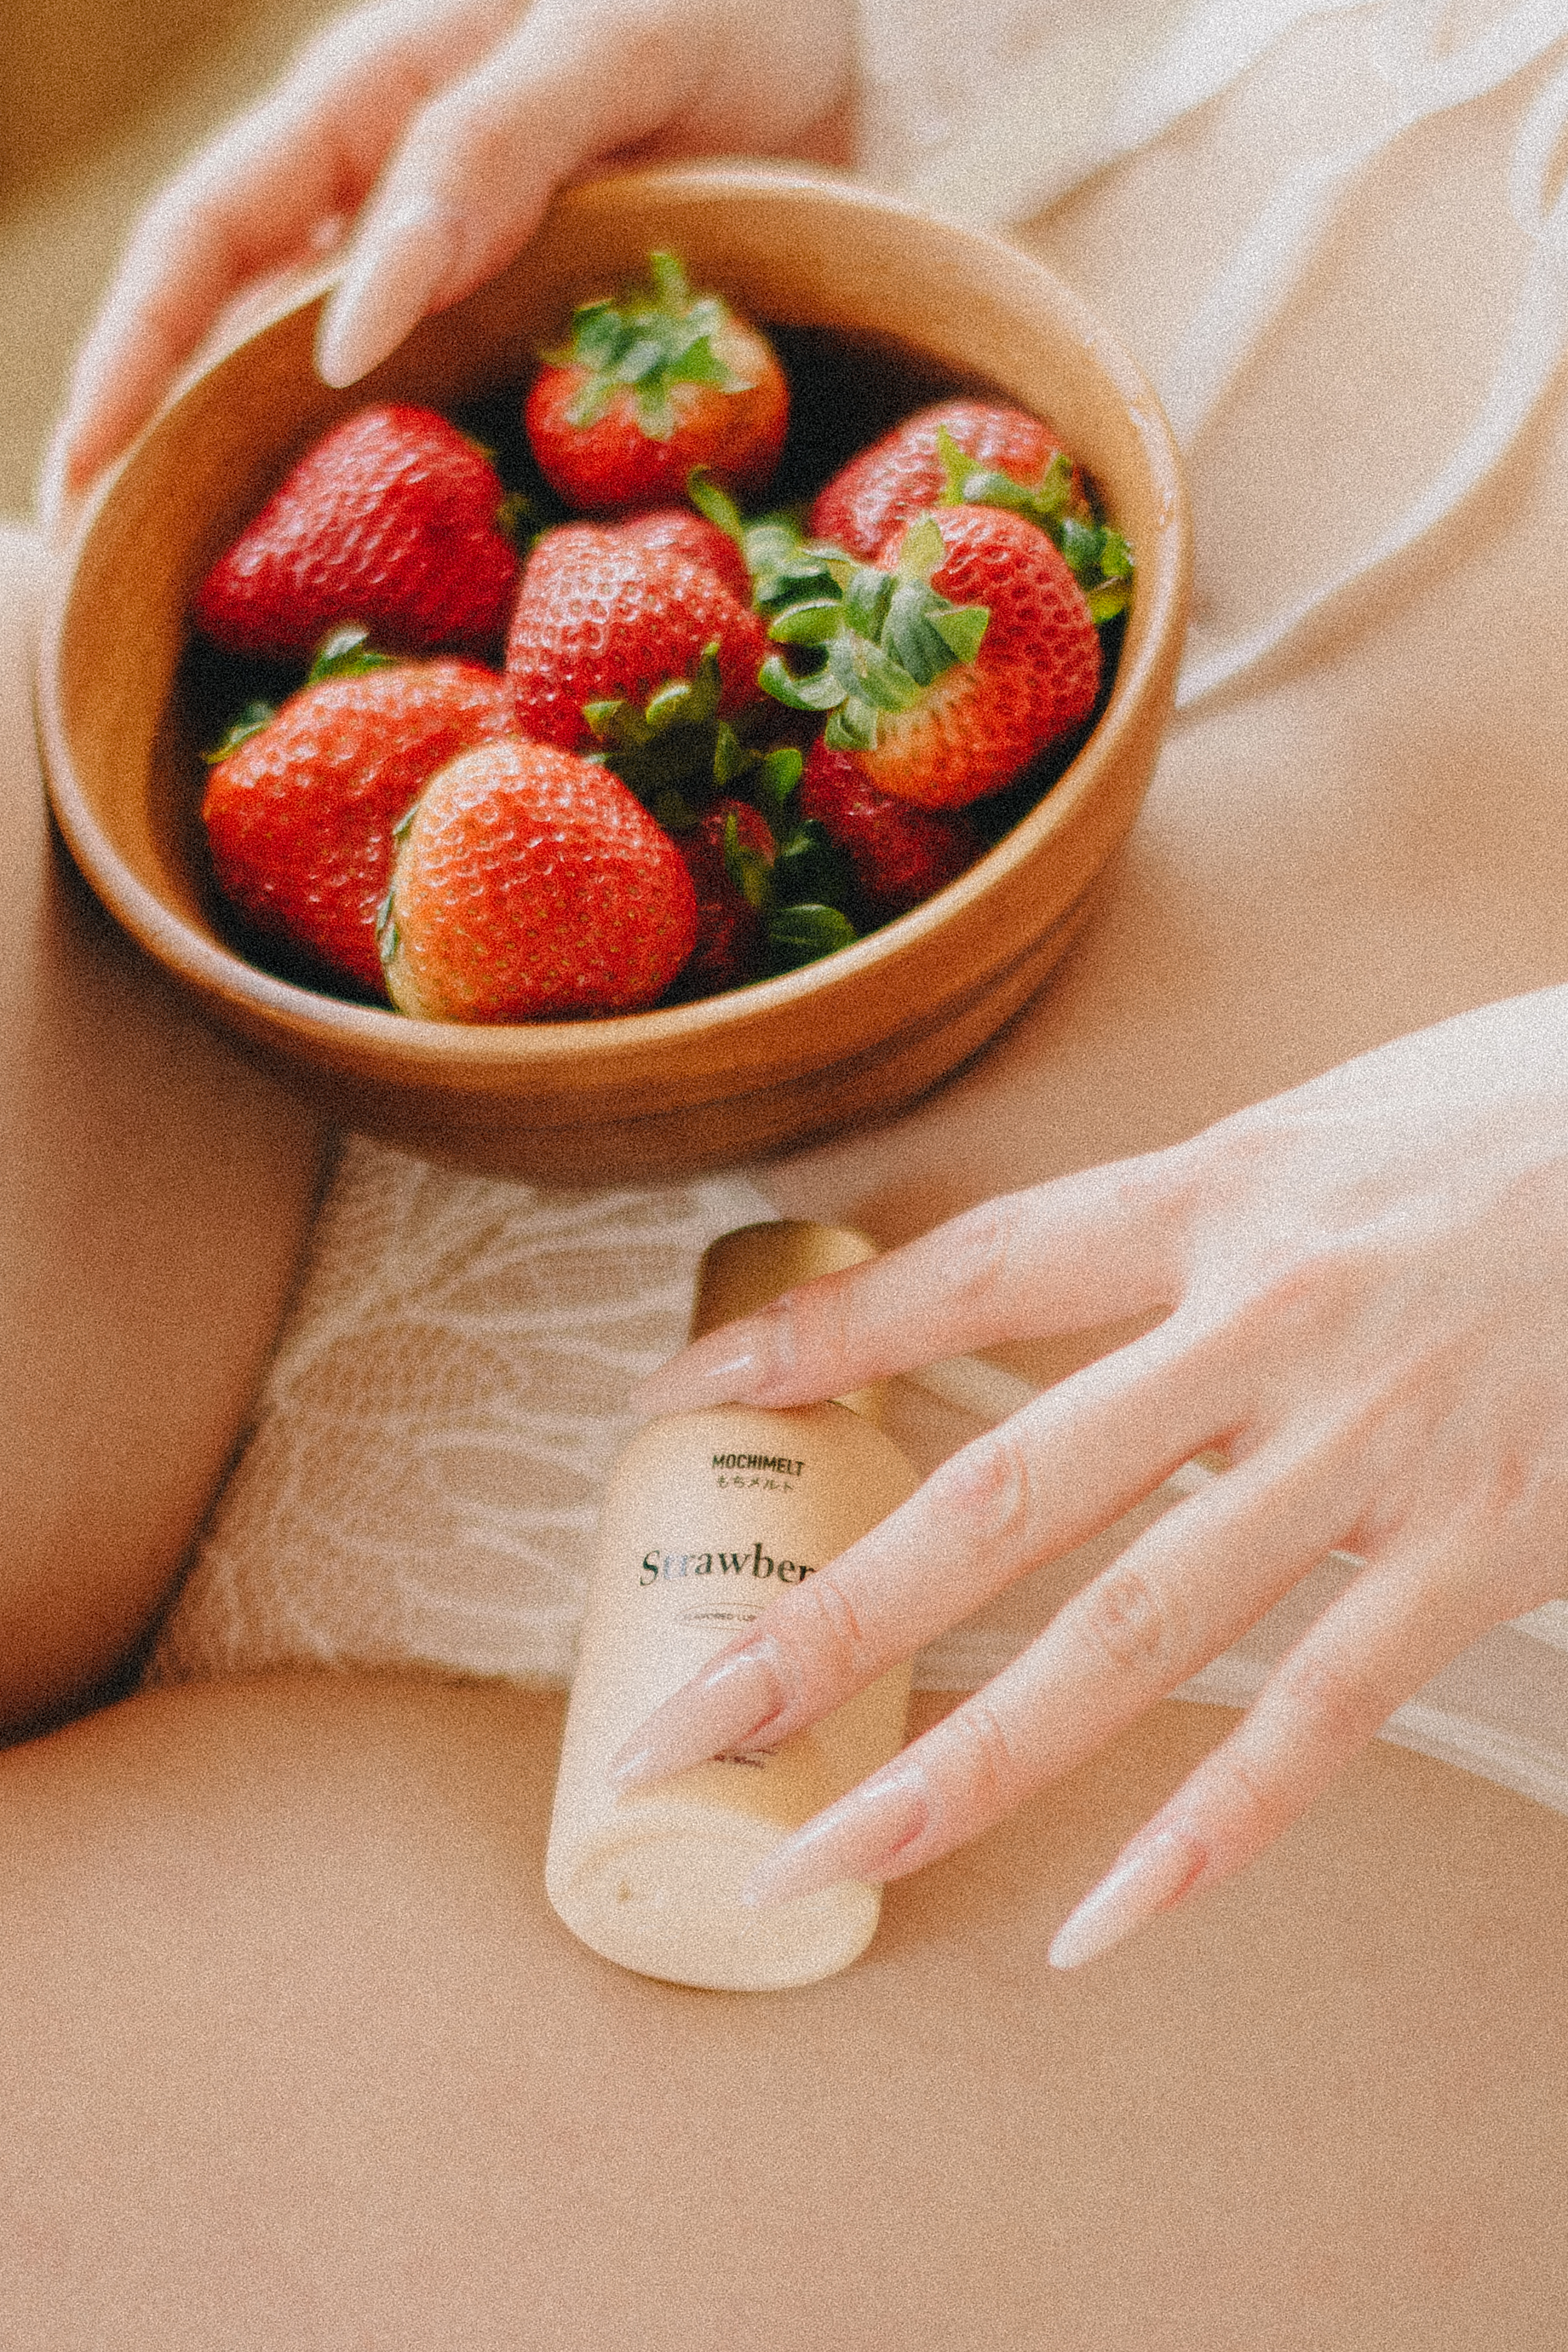 Mochi Melt strawberry lube next to a bowl of strawberries, on the lap of a woman wearing attractive lingerie